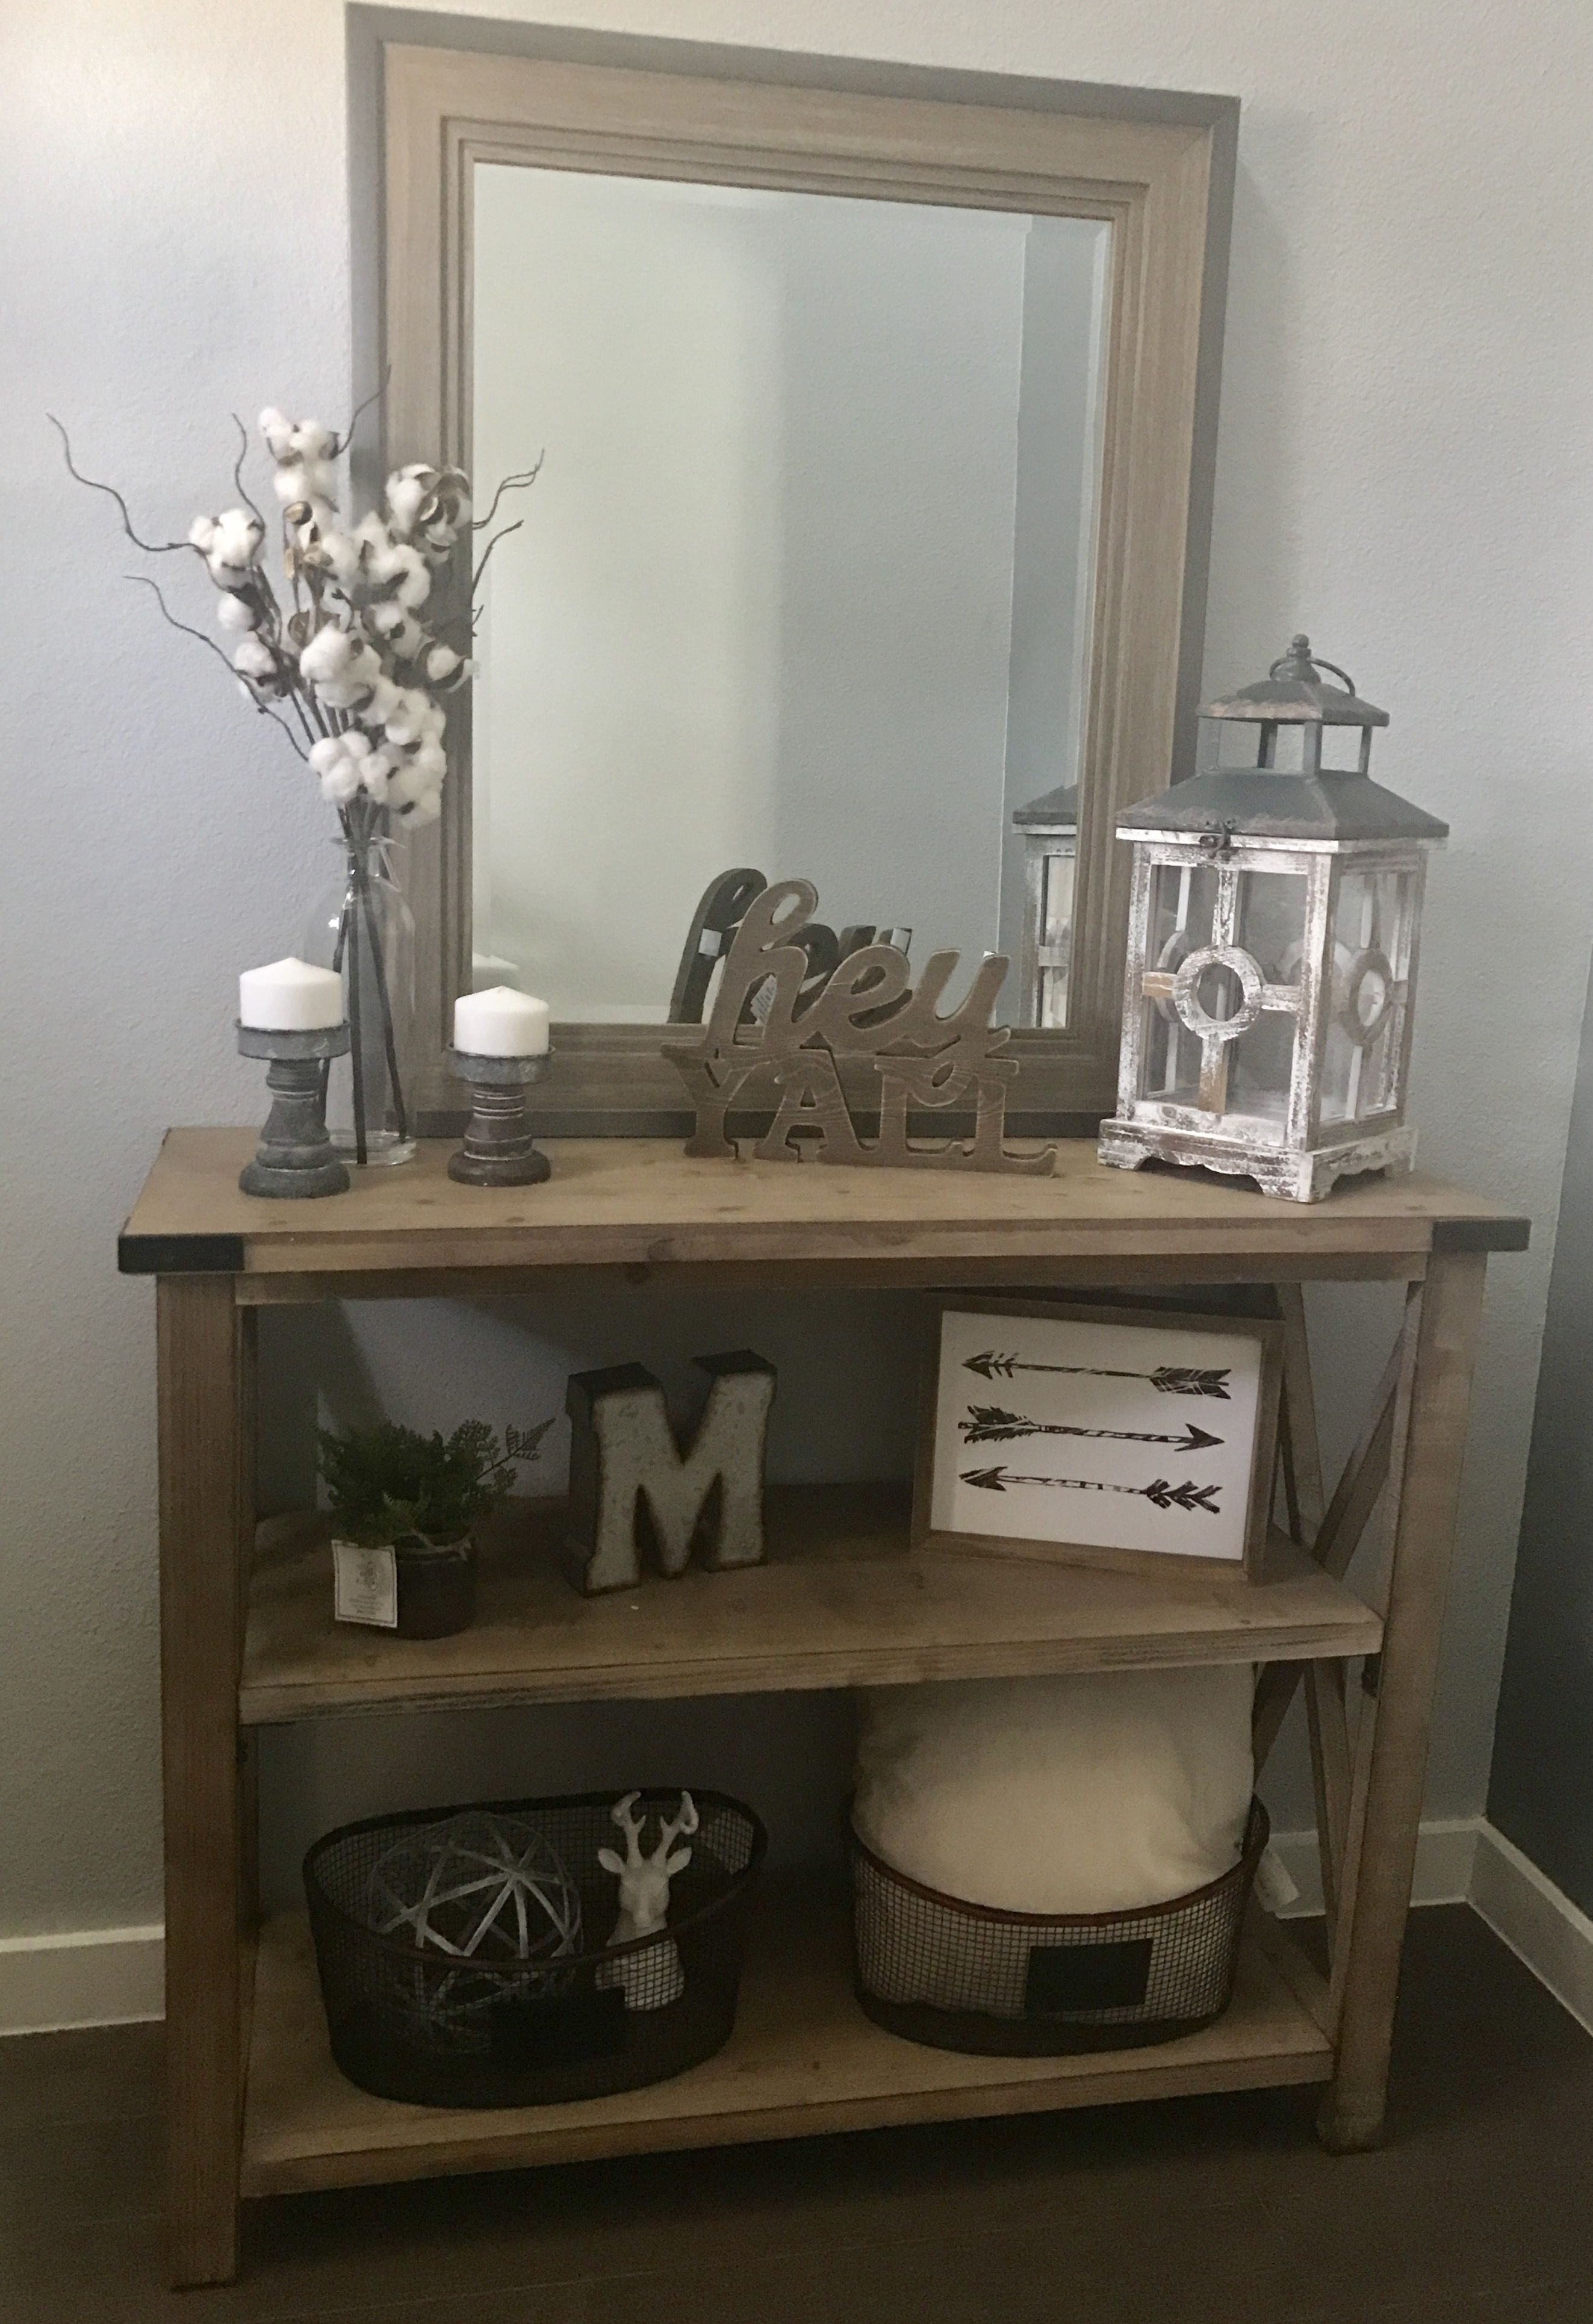 new modern farmhouse entry way console table decor mcmillen home accent ideas dining cover designs outdoor legs patio chairs clearance lawn mahogany nightstand small round side